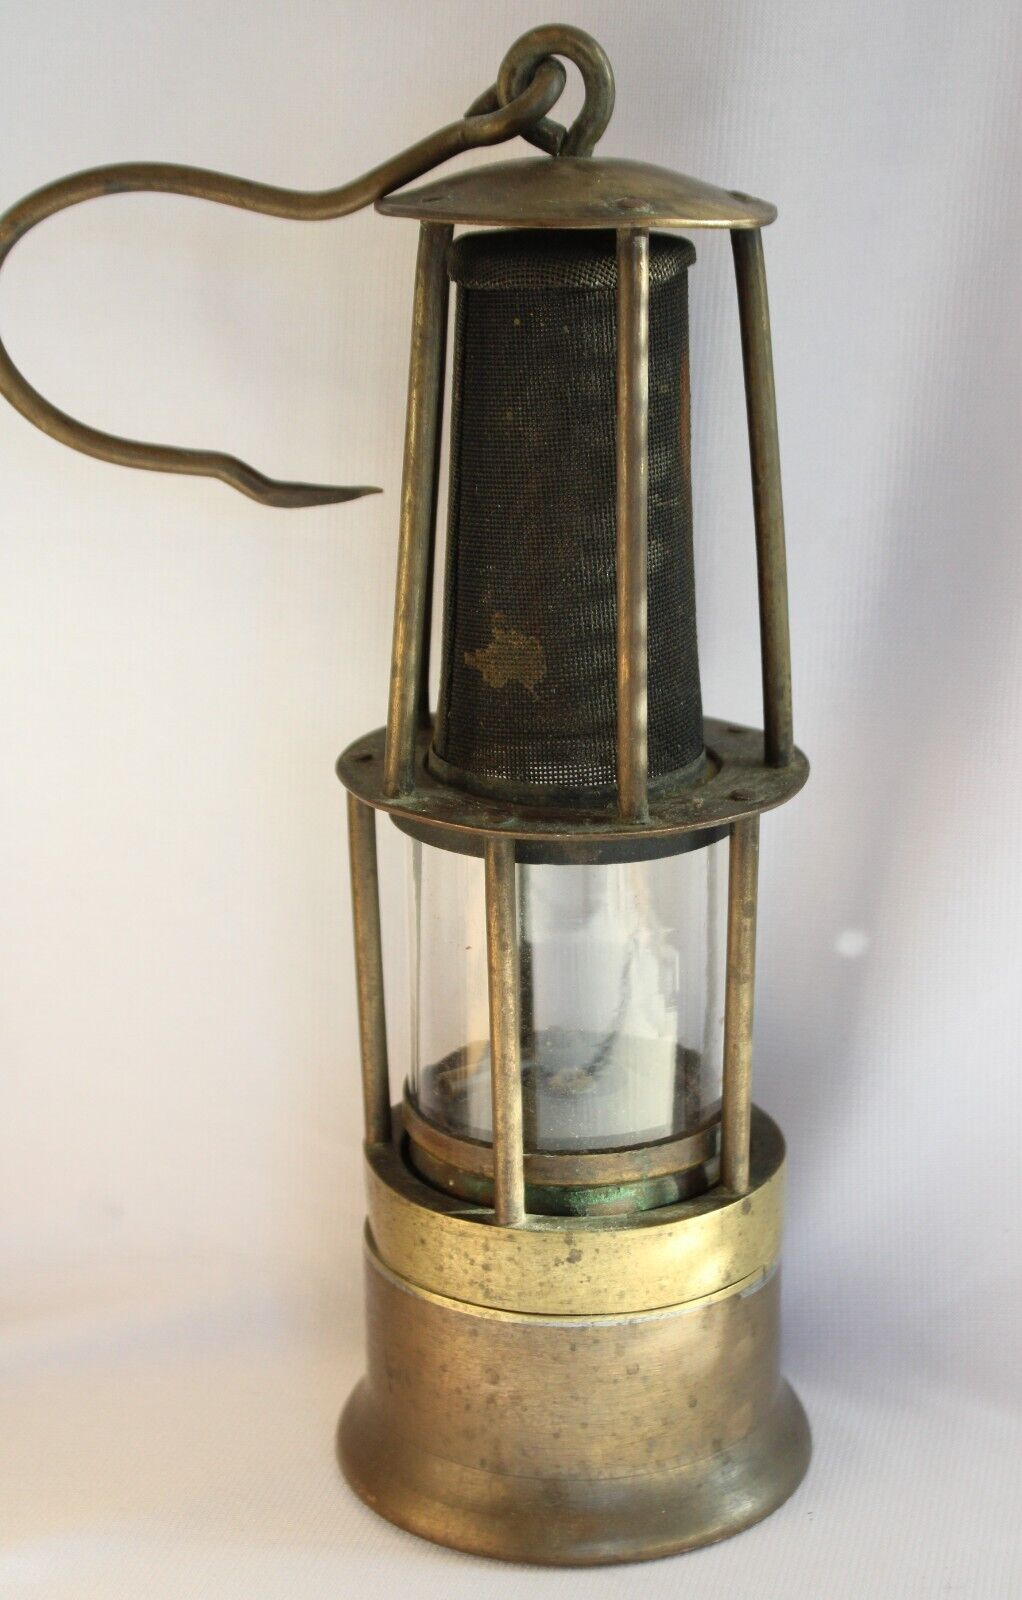 EARLY UNMARKED ANTIQUE BRASS MINER'S SAFETY LAMP MINING